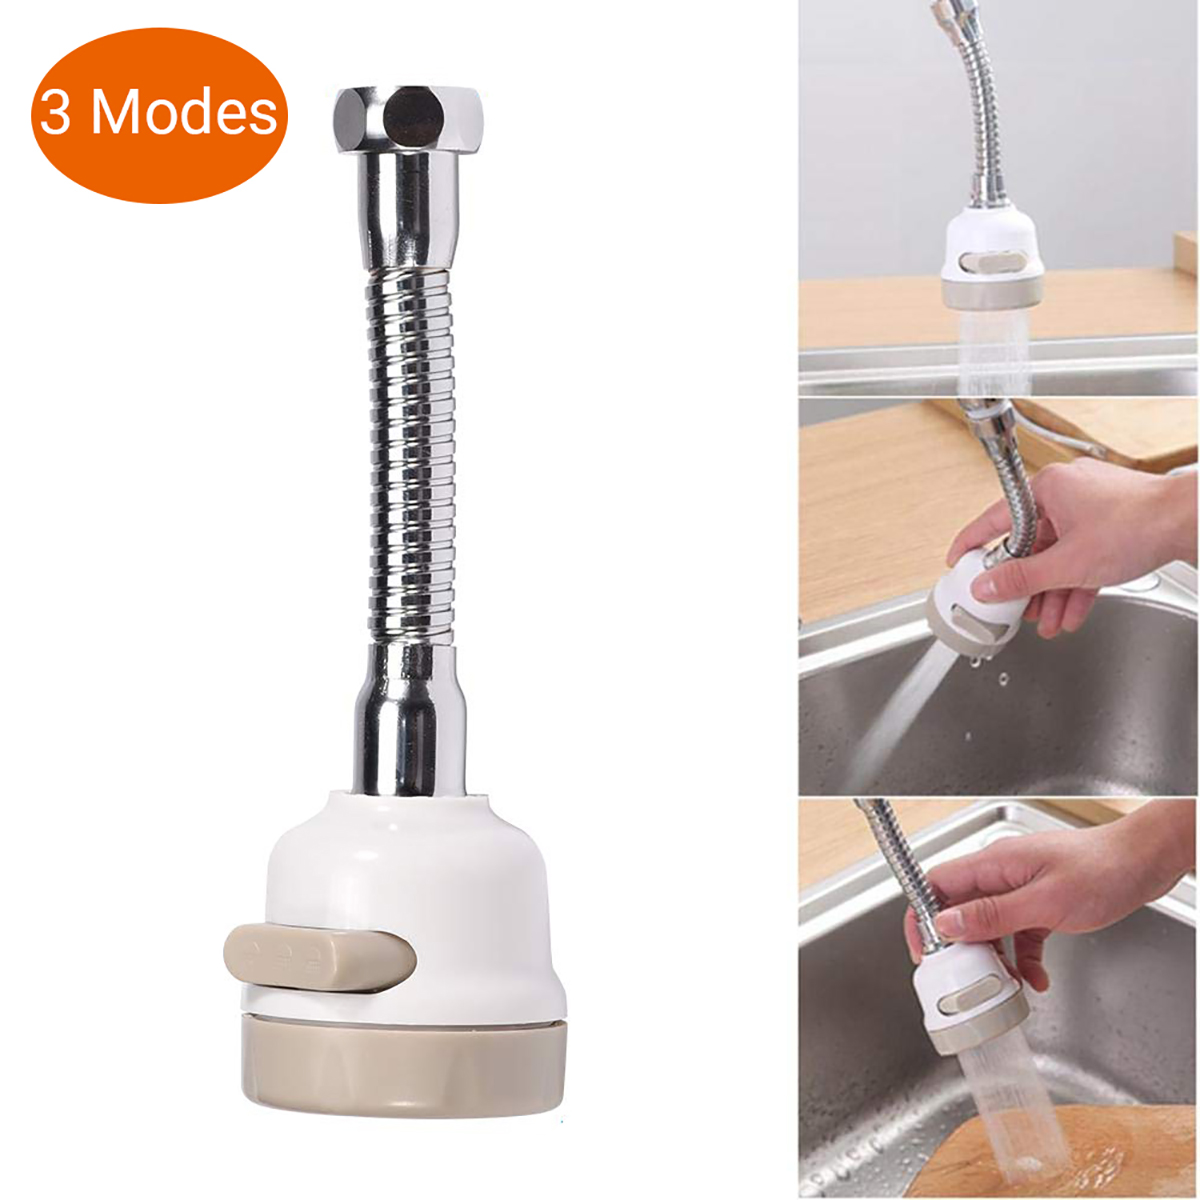 

360 Rotatable Faucet Sprayer Attachment Kitchen Tap Head ABS Water Faucet Sprayer Splash Filter Nozzle Adapt for Kitchen